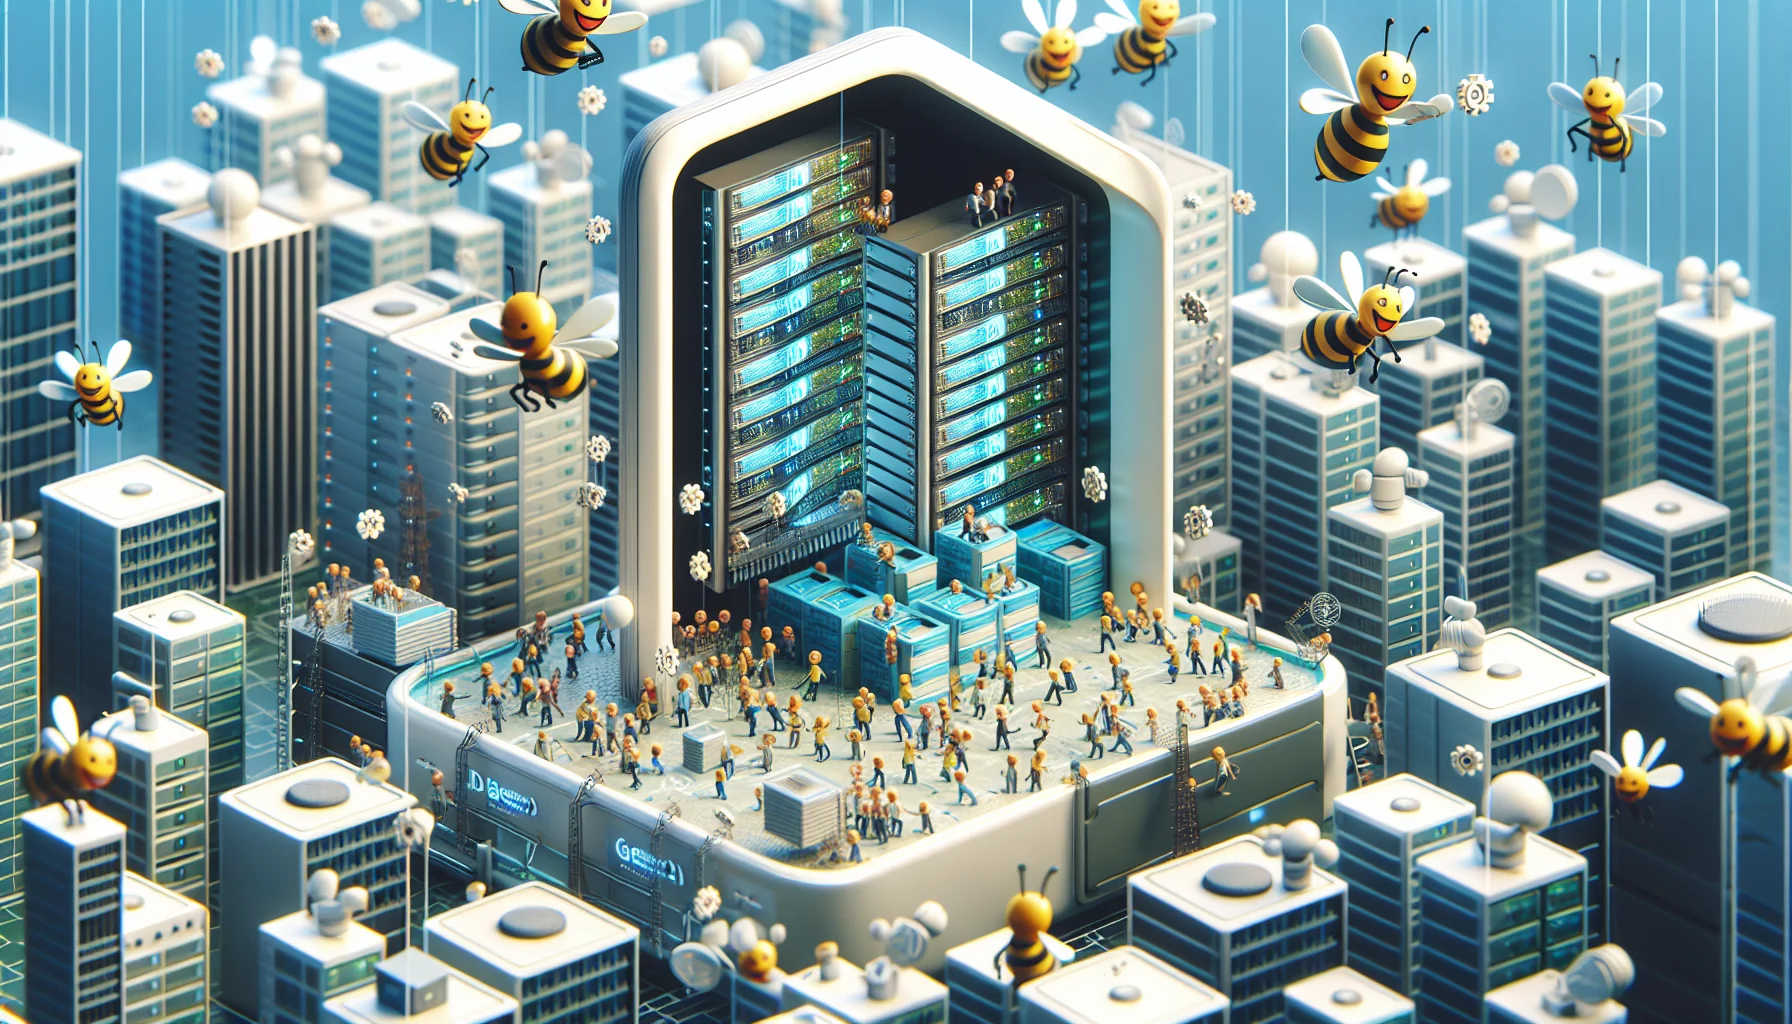 Generate a humorous, creative image that showcases a generic branded web hosting application. In this scenario, the app finds itself in a lively environment filled with servers portrayed like bustling city buildings. On the screen of the application, we see tiny human-like figures working away, reminiscent of the inside of an active hive. There's a sense of lightness and fun, with characters laughing and smiling as they go about their tasks. This is to convey the ease and joy of web hosting through this application, attracting viewers to explore it further.